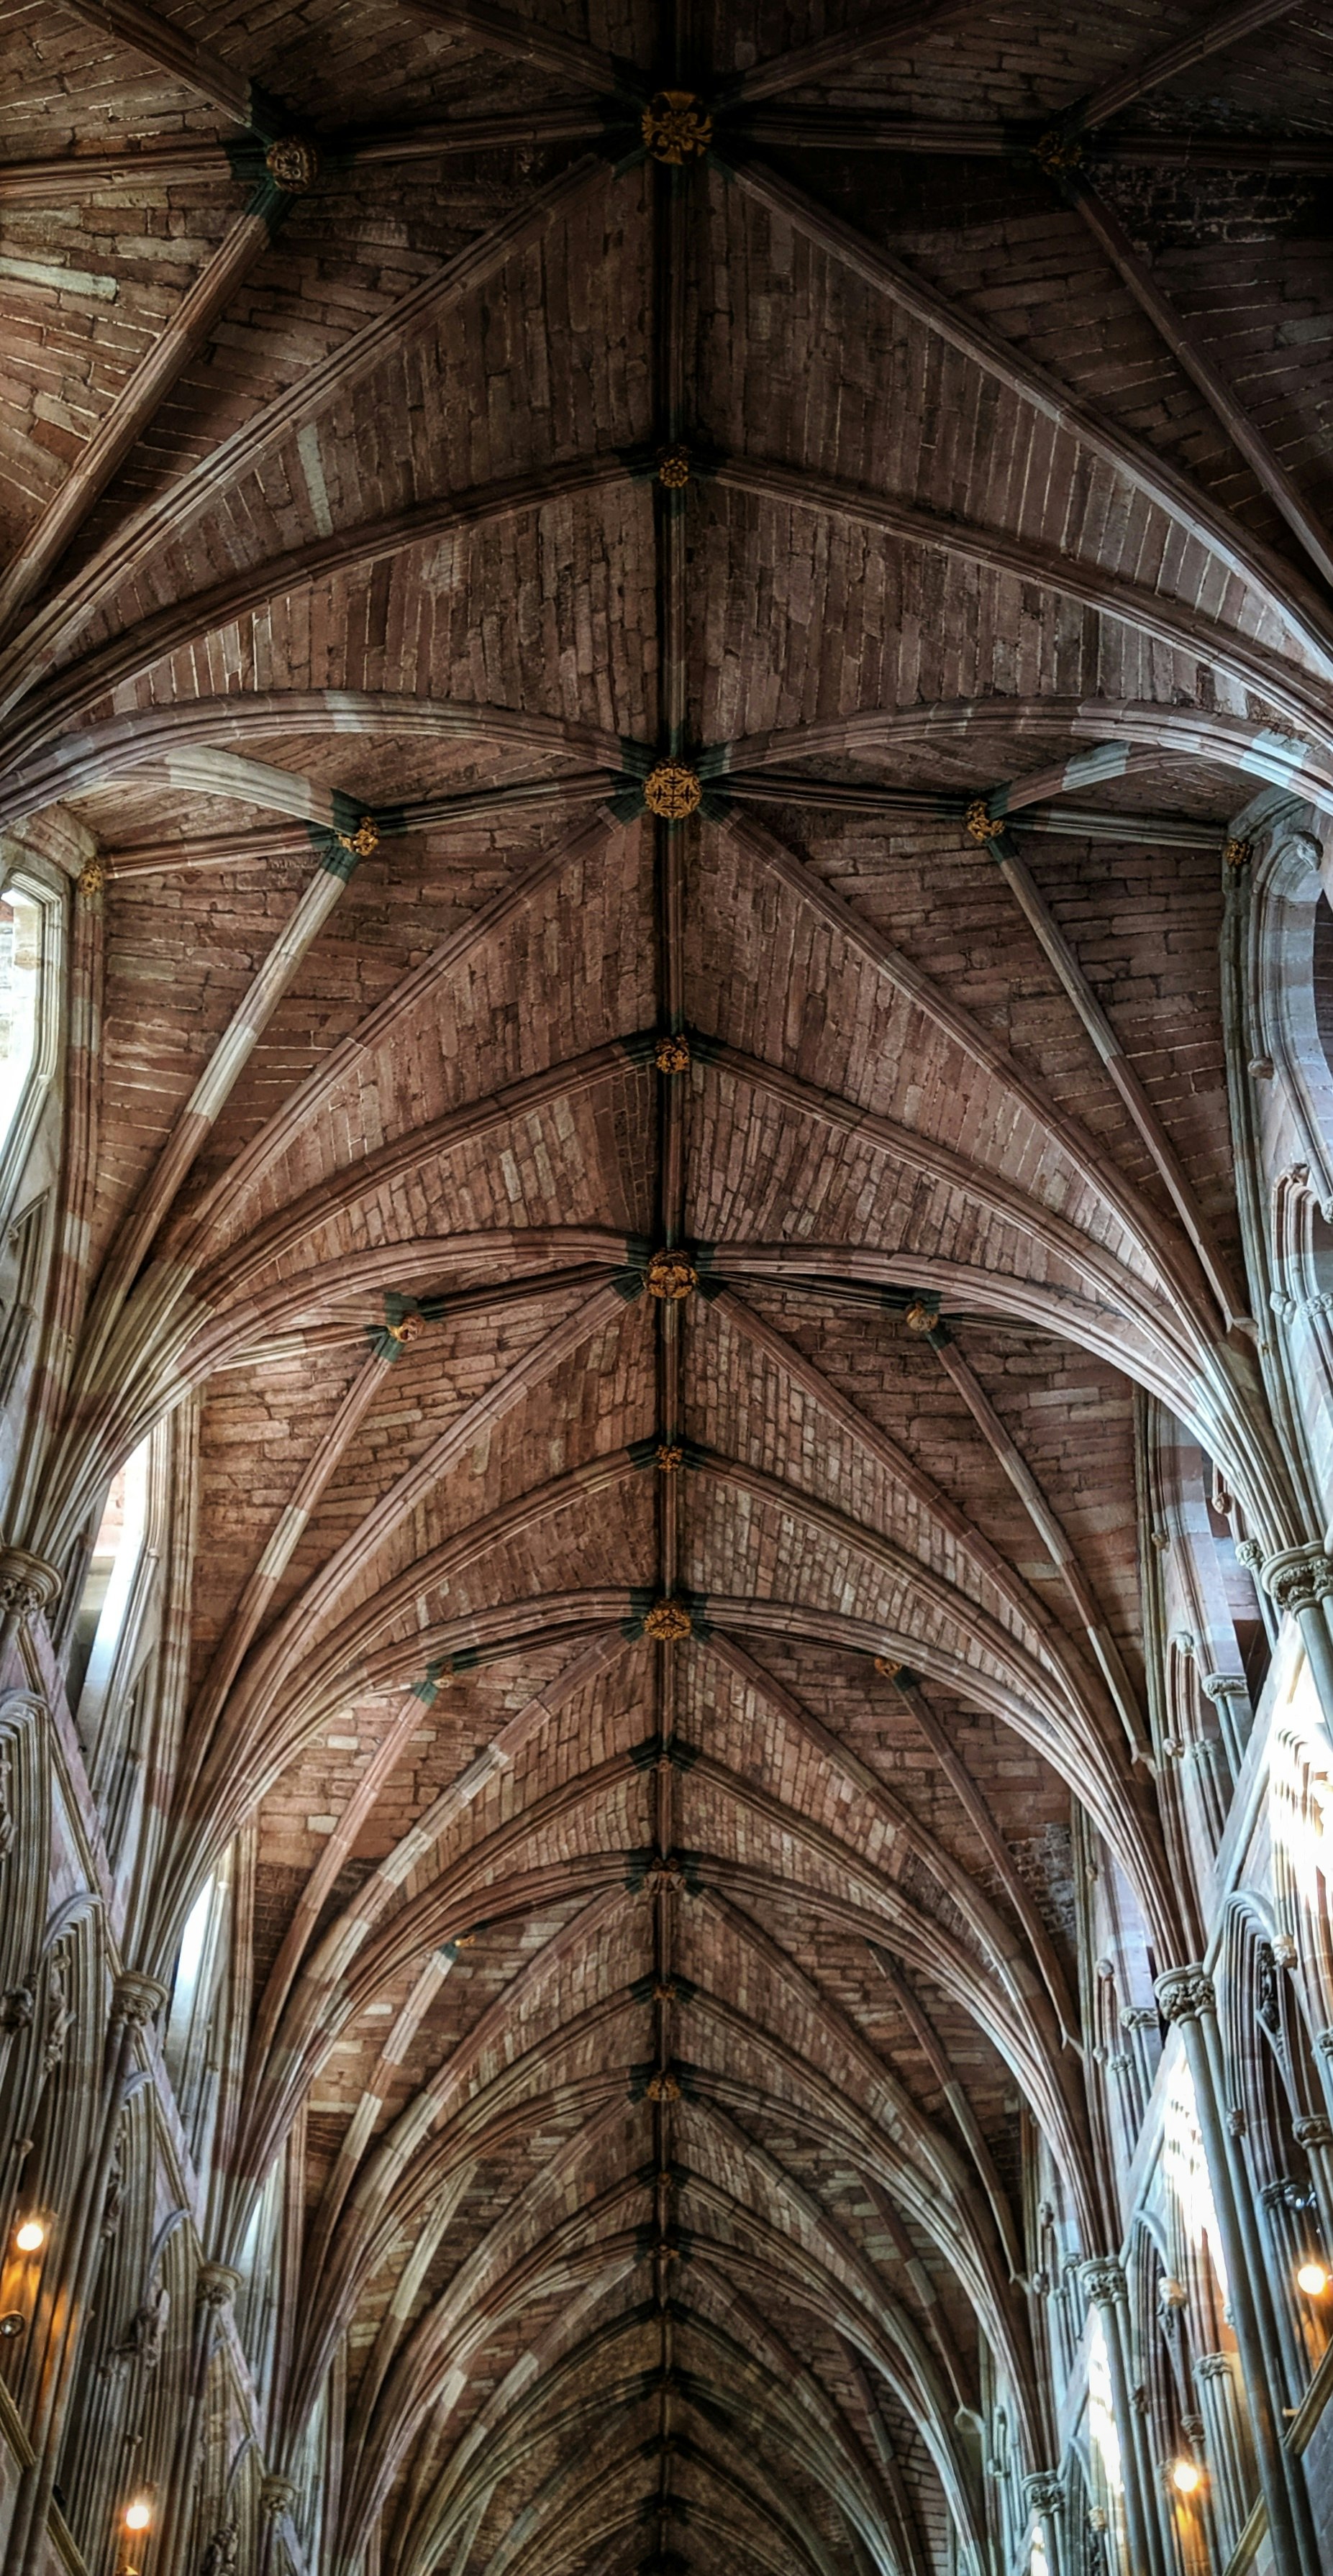 Intricate brick ceiling with beautiful symmetry at the cathedral 